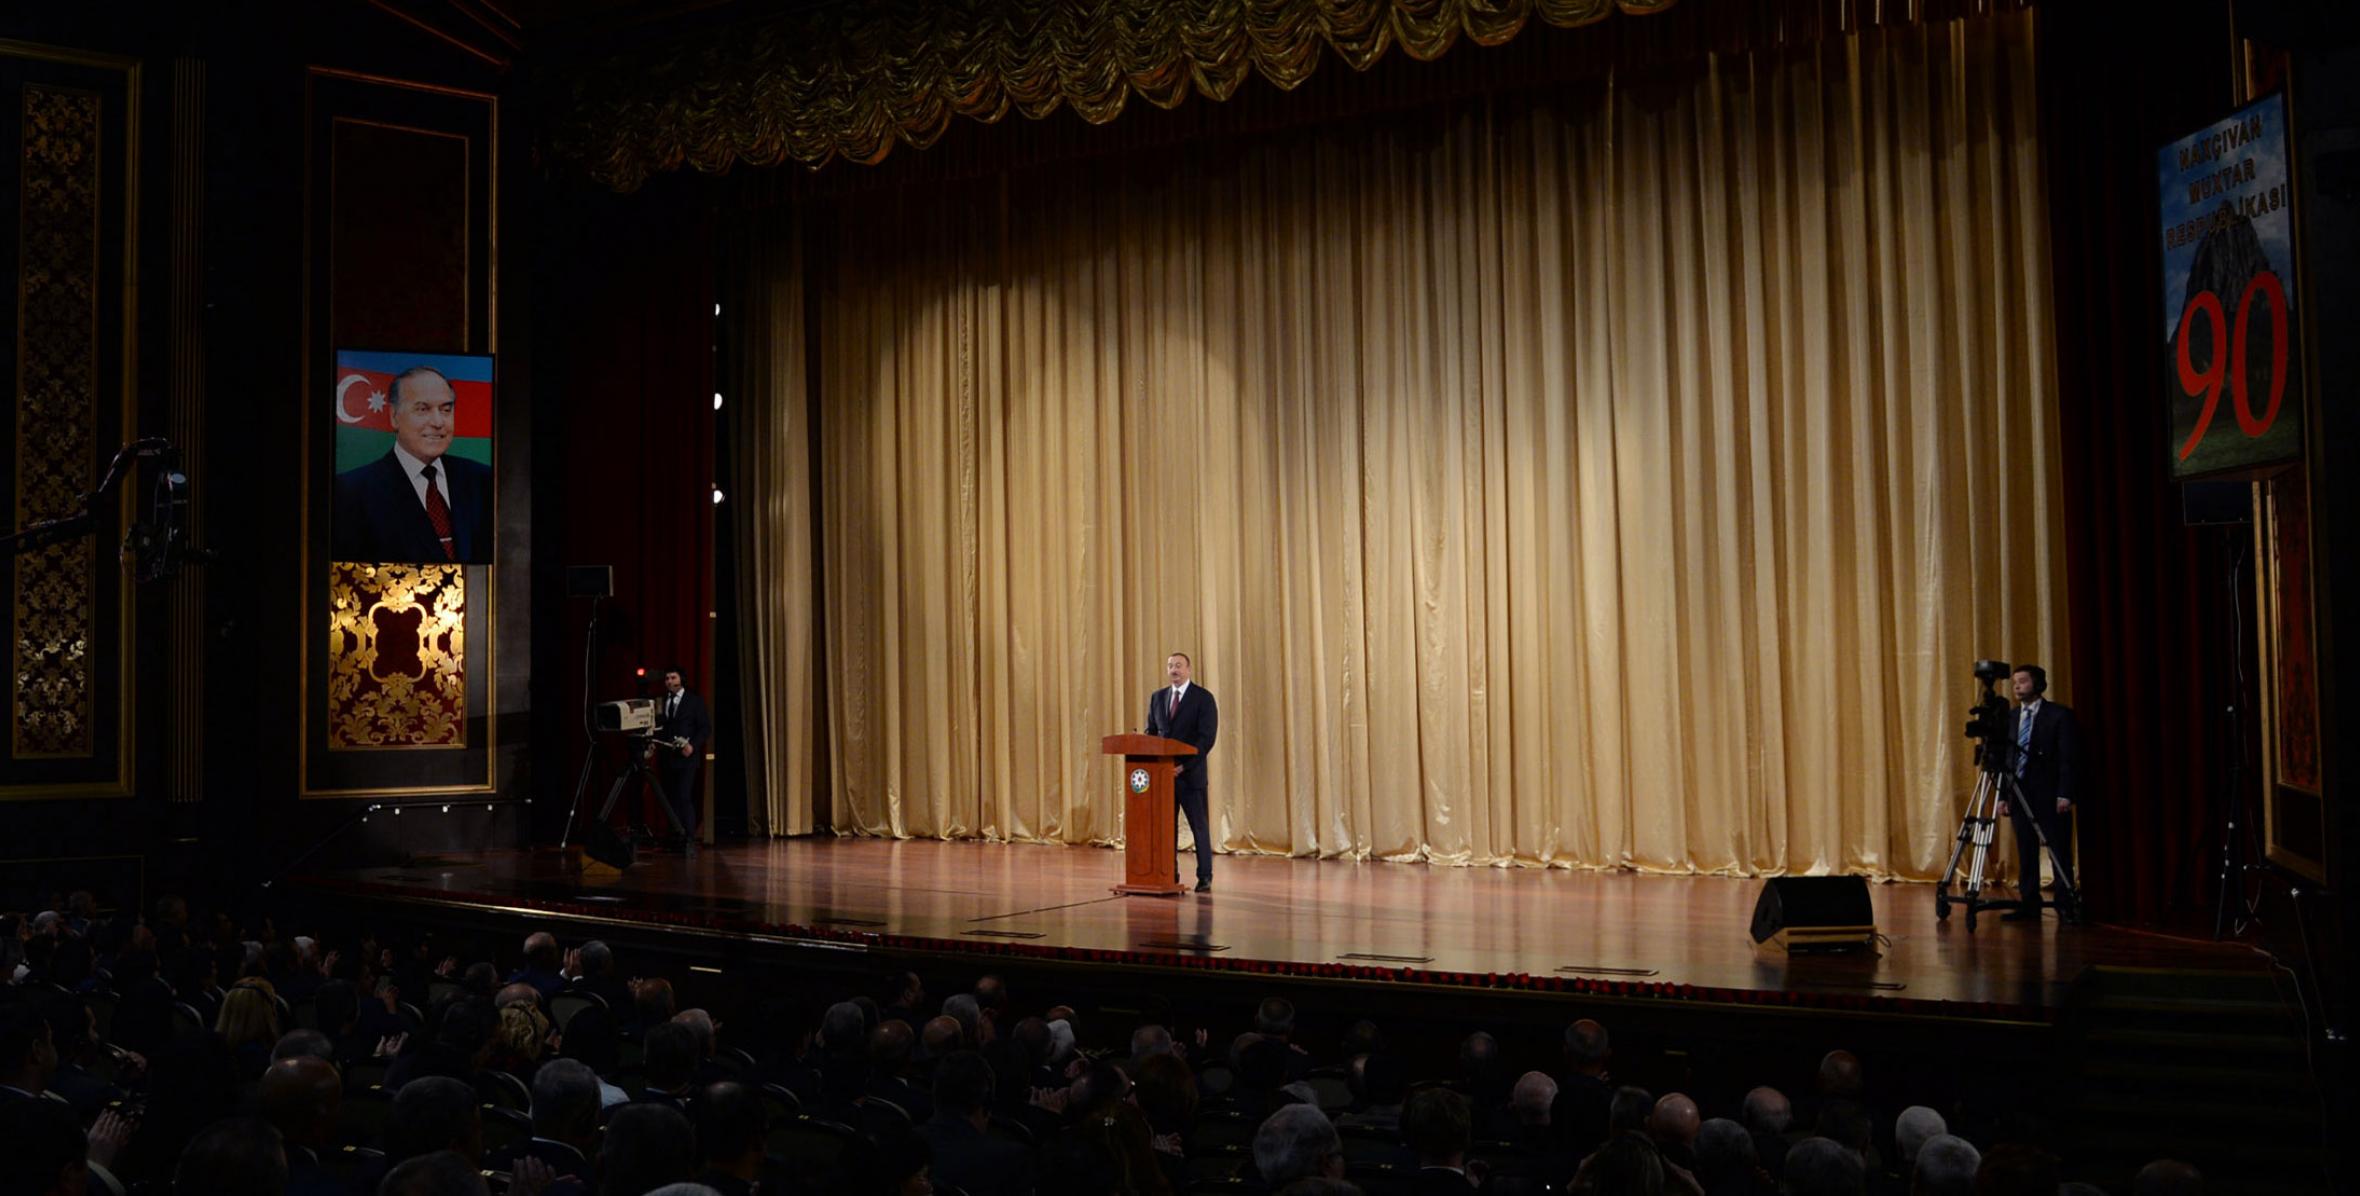 Speech by Ilham Aliyev at the ceremony to commemorate the 90th anniversary of the Nakhchivan Autonomous Republic